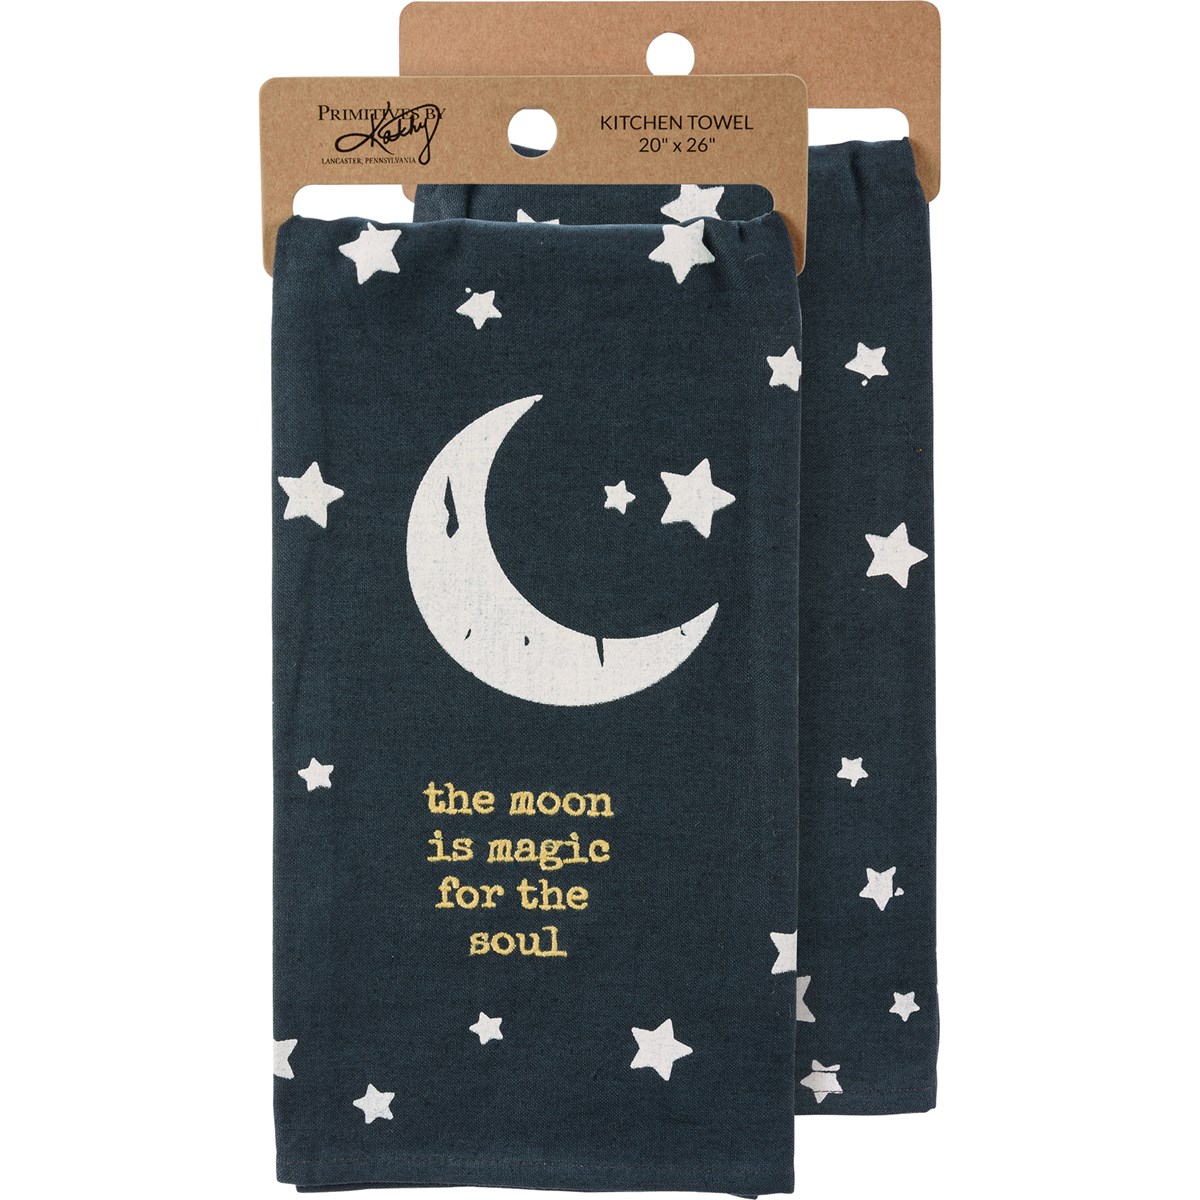 The Moon Is Magic For The Soul Kitchen Towel - Cotton, Linen